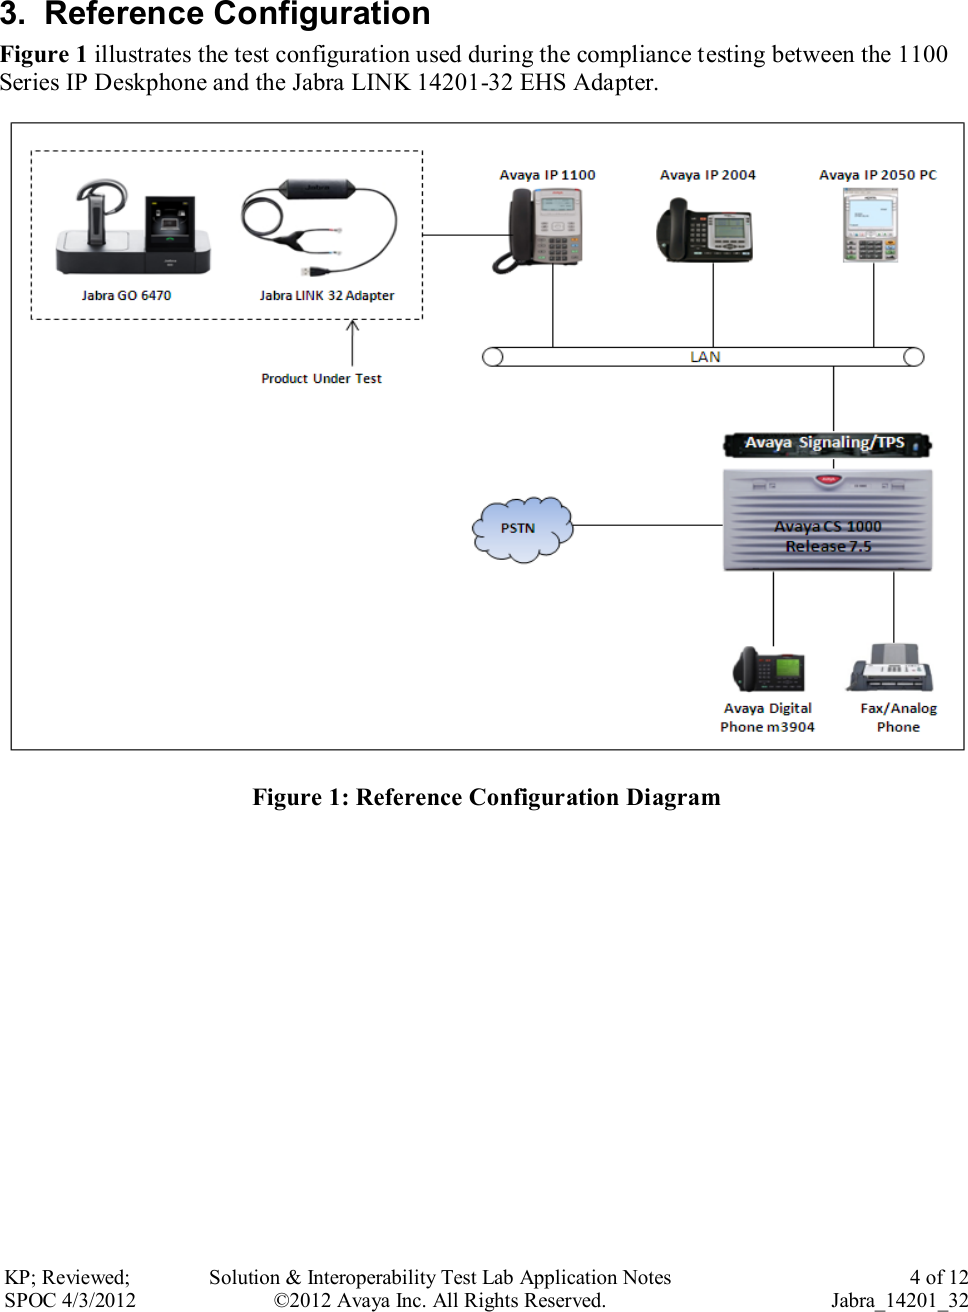 Page 4 of 12 - Avaya Avaya-1100-Series-Application-Note- Application Notes For Configuring GN Netcom Jabra Link 14201-32 EHS Headset Adapter With 1100 Series IP Deskphones  Avaya-1100-series-application-note